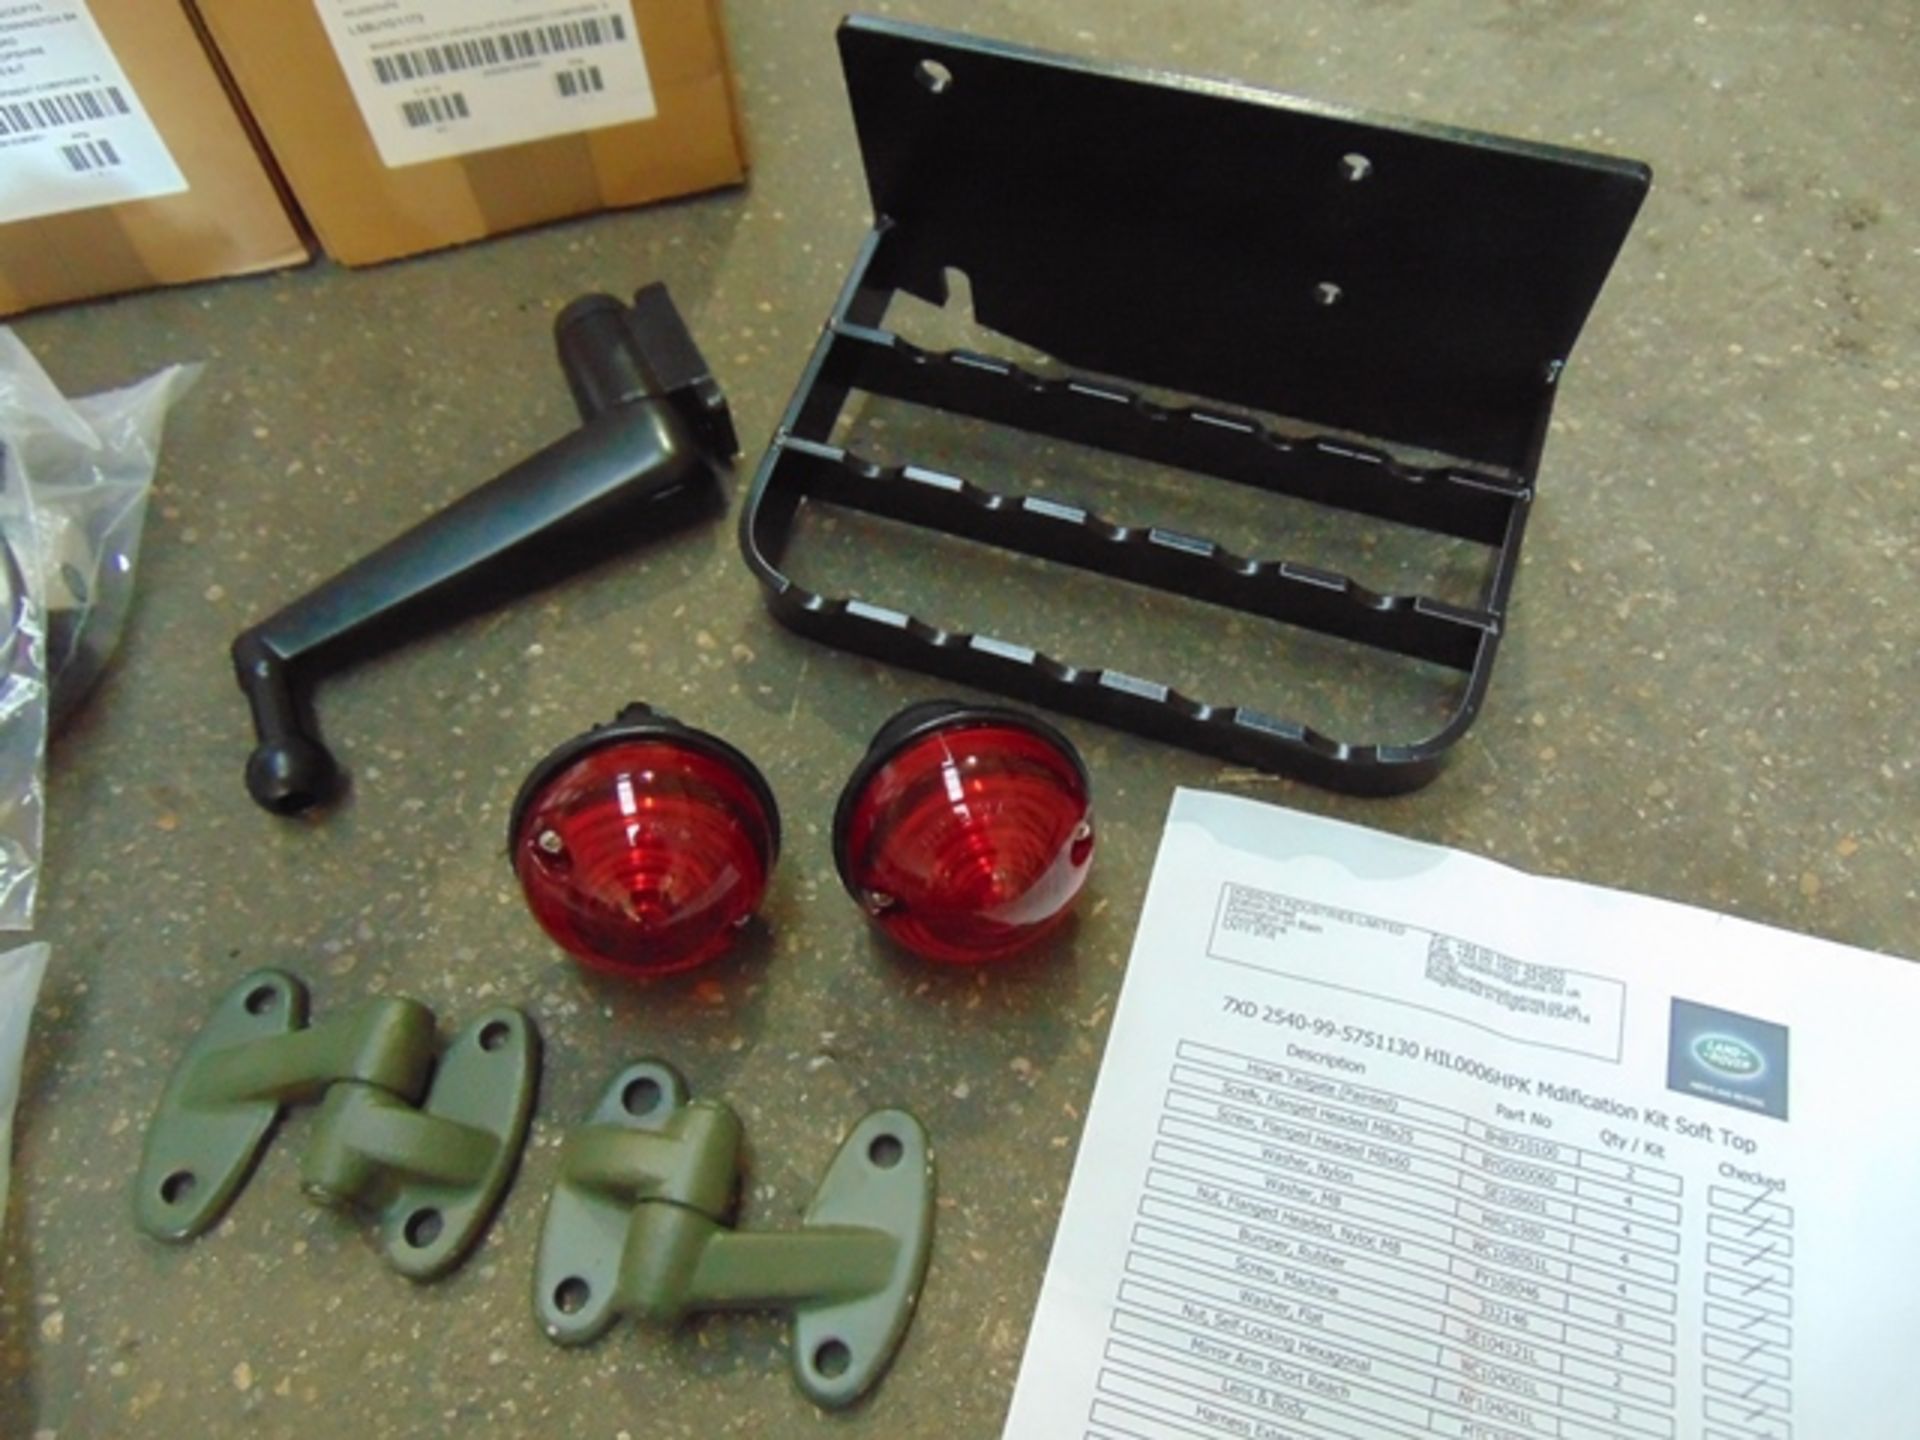 10 x Land Rover 90/110 Soft Top Modification Kits - Image 2 of 5